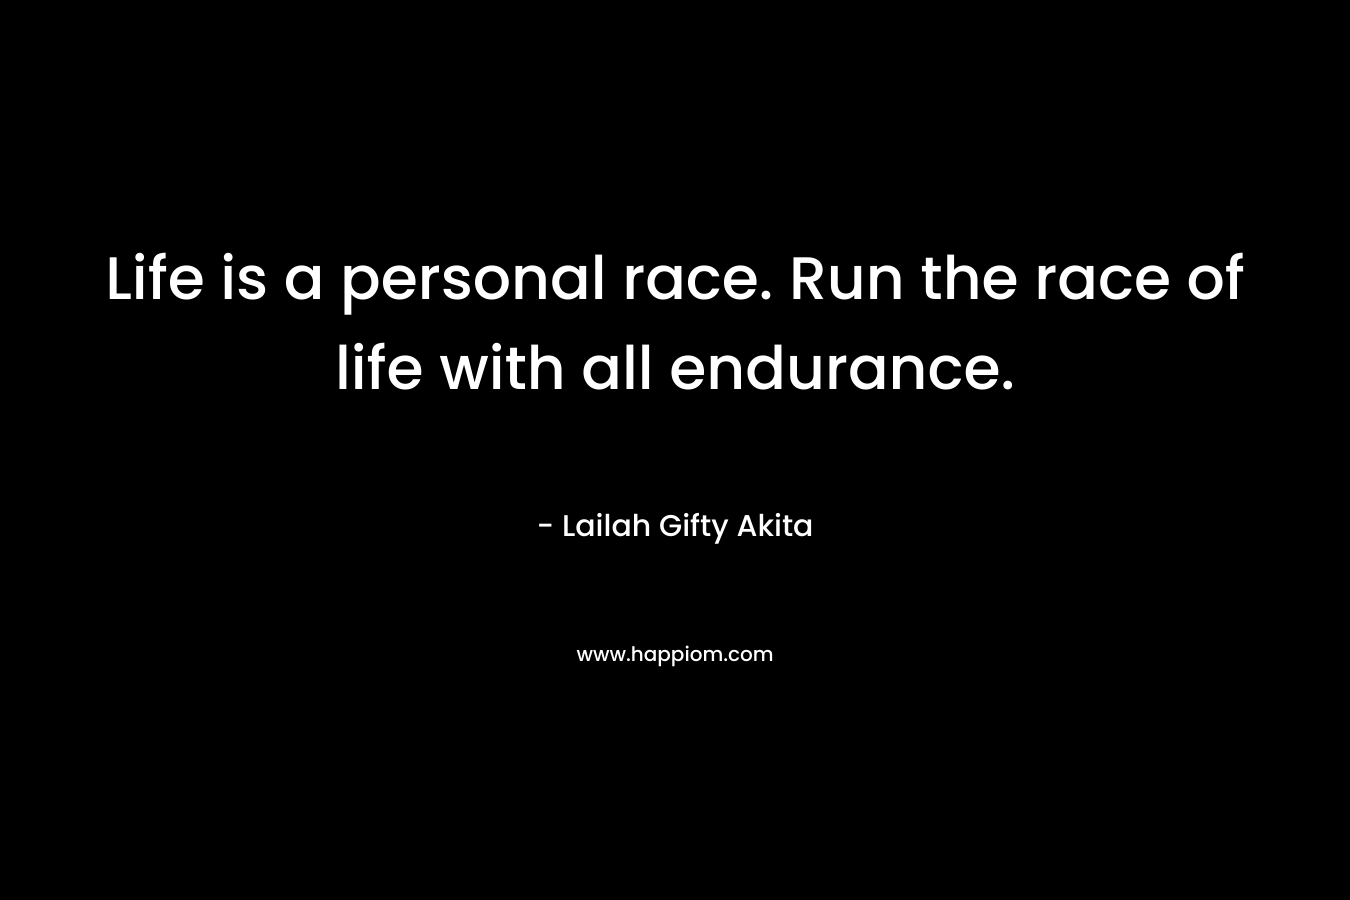 Life is a personal race. Run the race of life with all endurance.